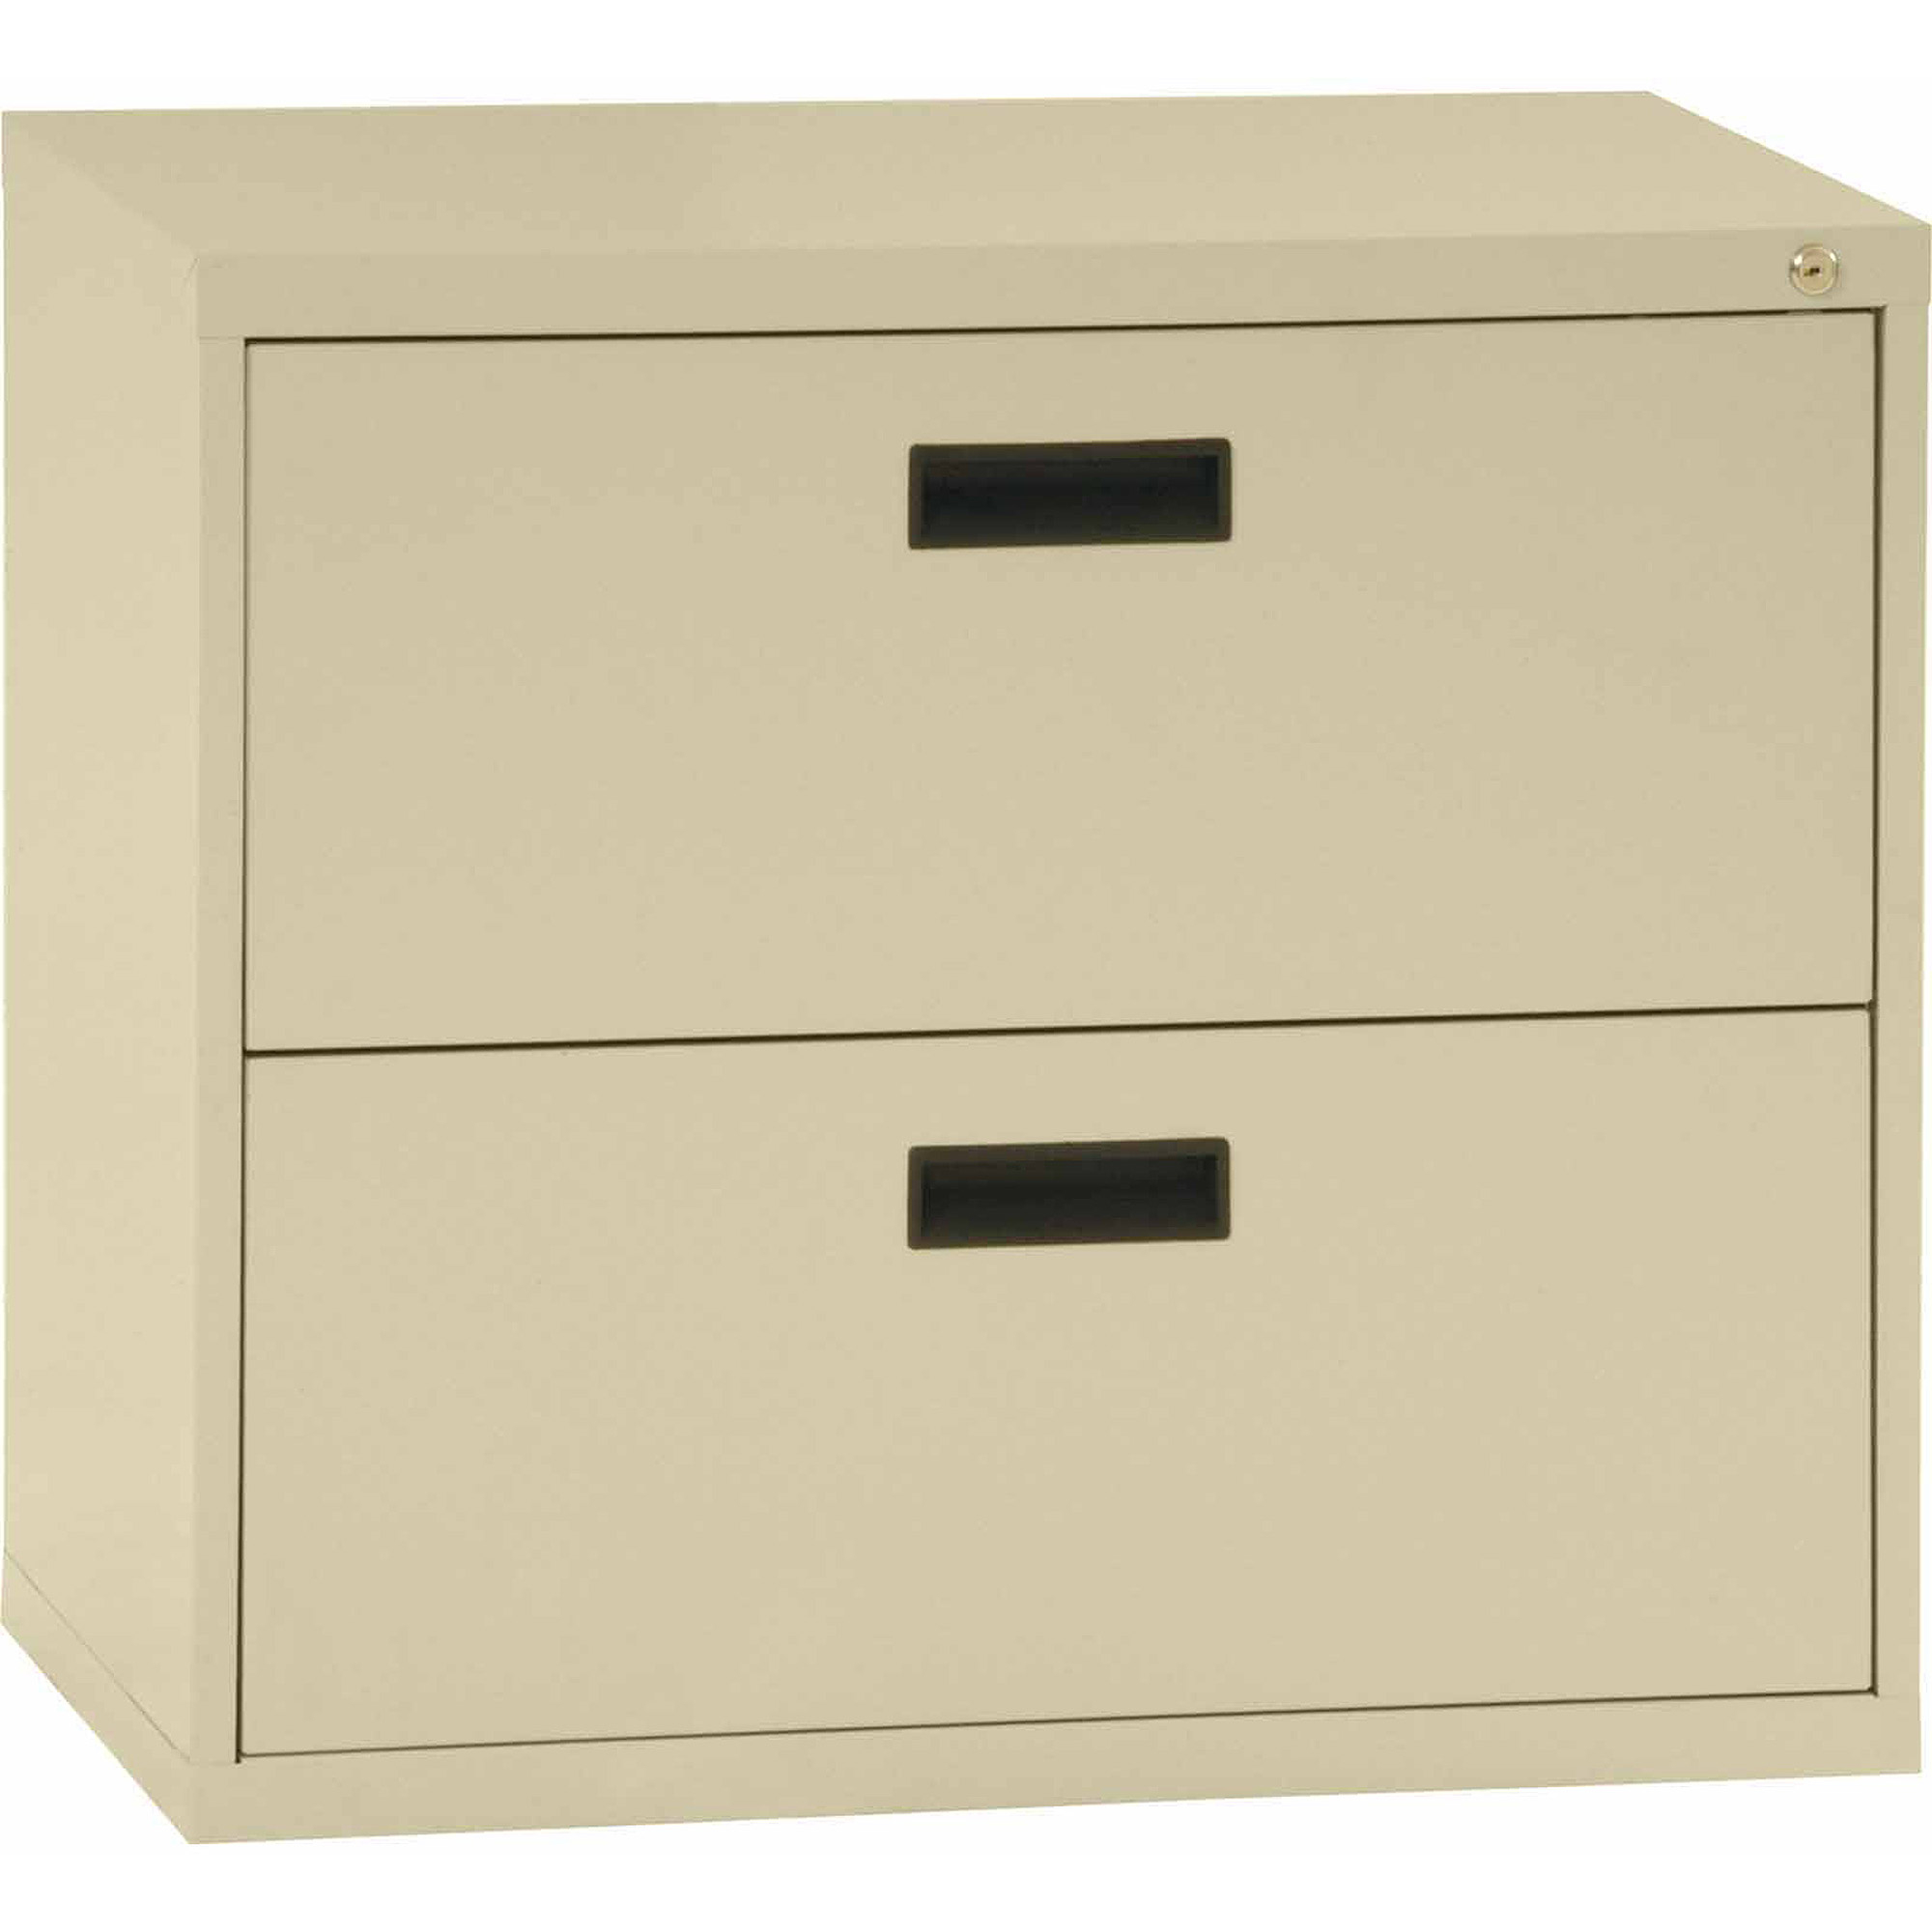 Sandusky 400 Series 2 Drawer Lateral File Cabinet Walmart intended for measurements 2000 X 2000